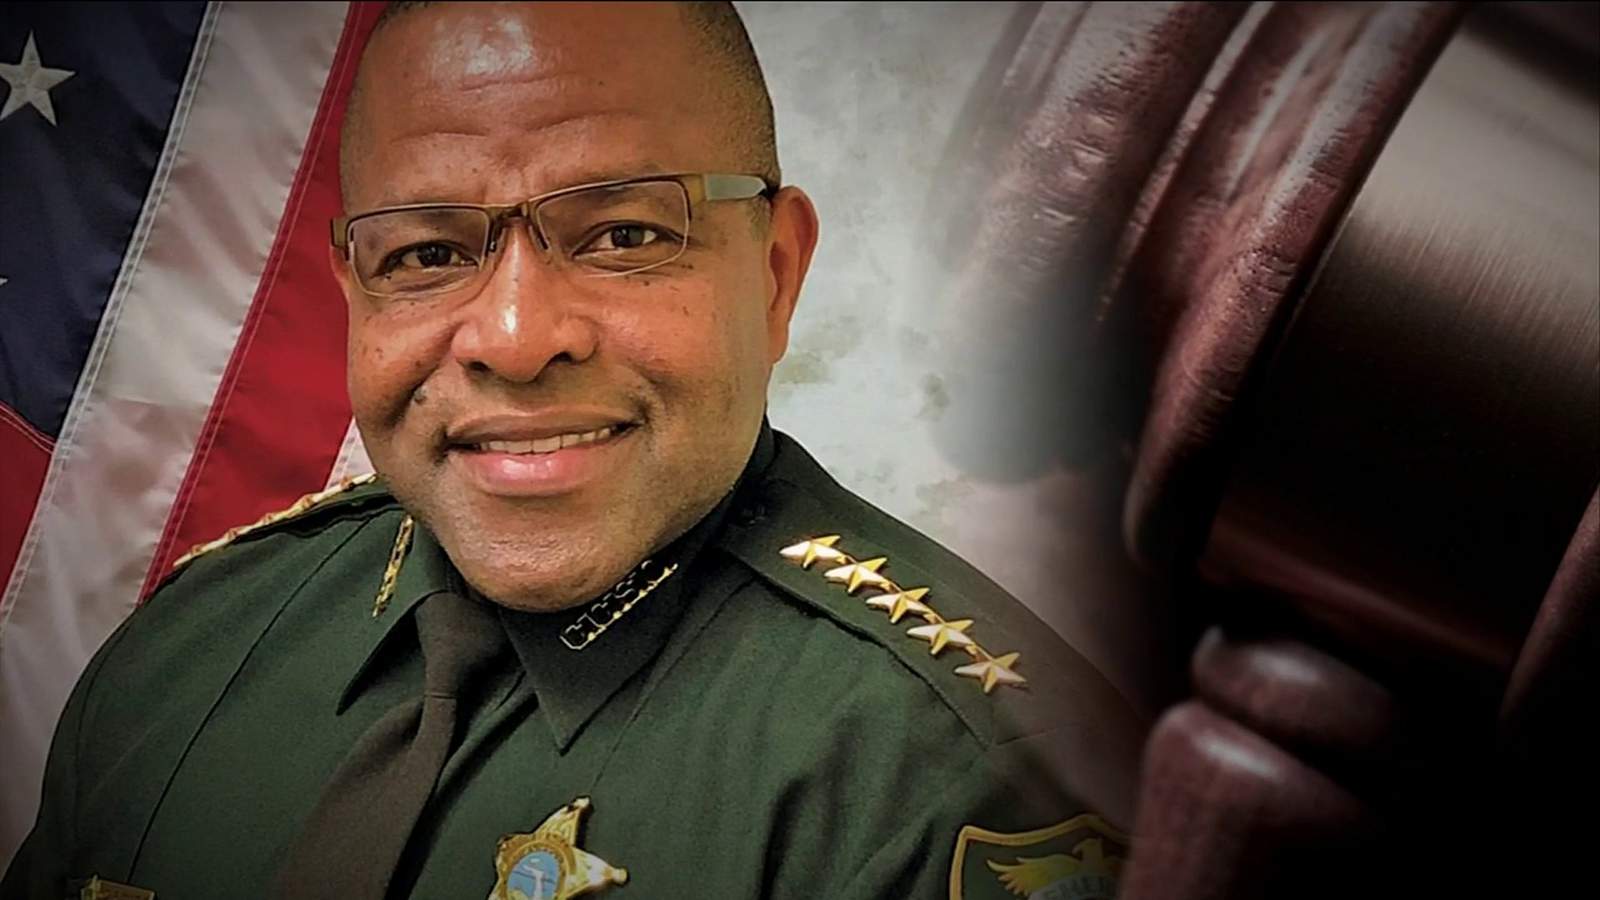 FDLE summary sheds light on why Sheriff Daniels is facing charges